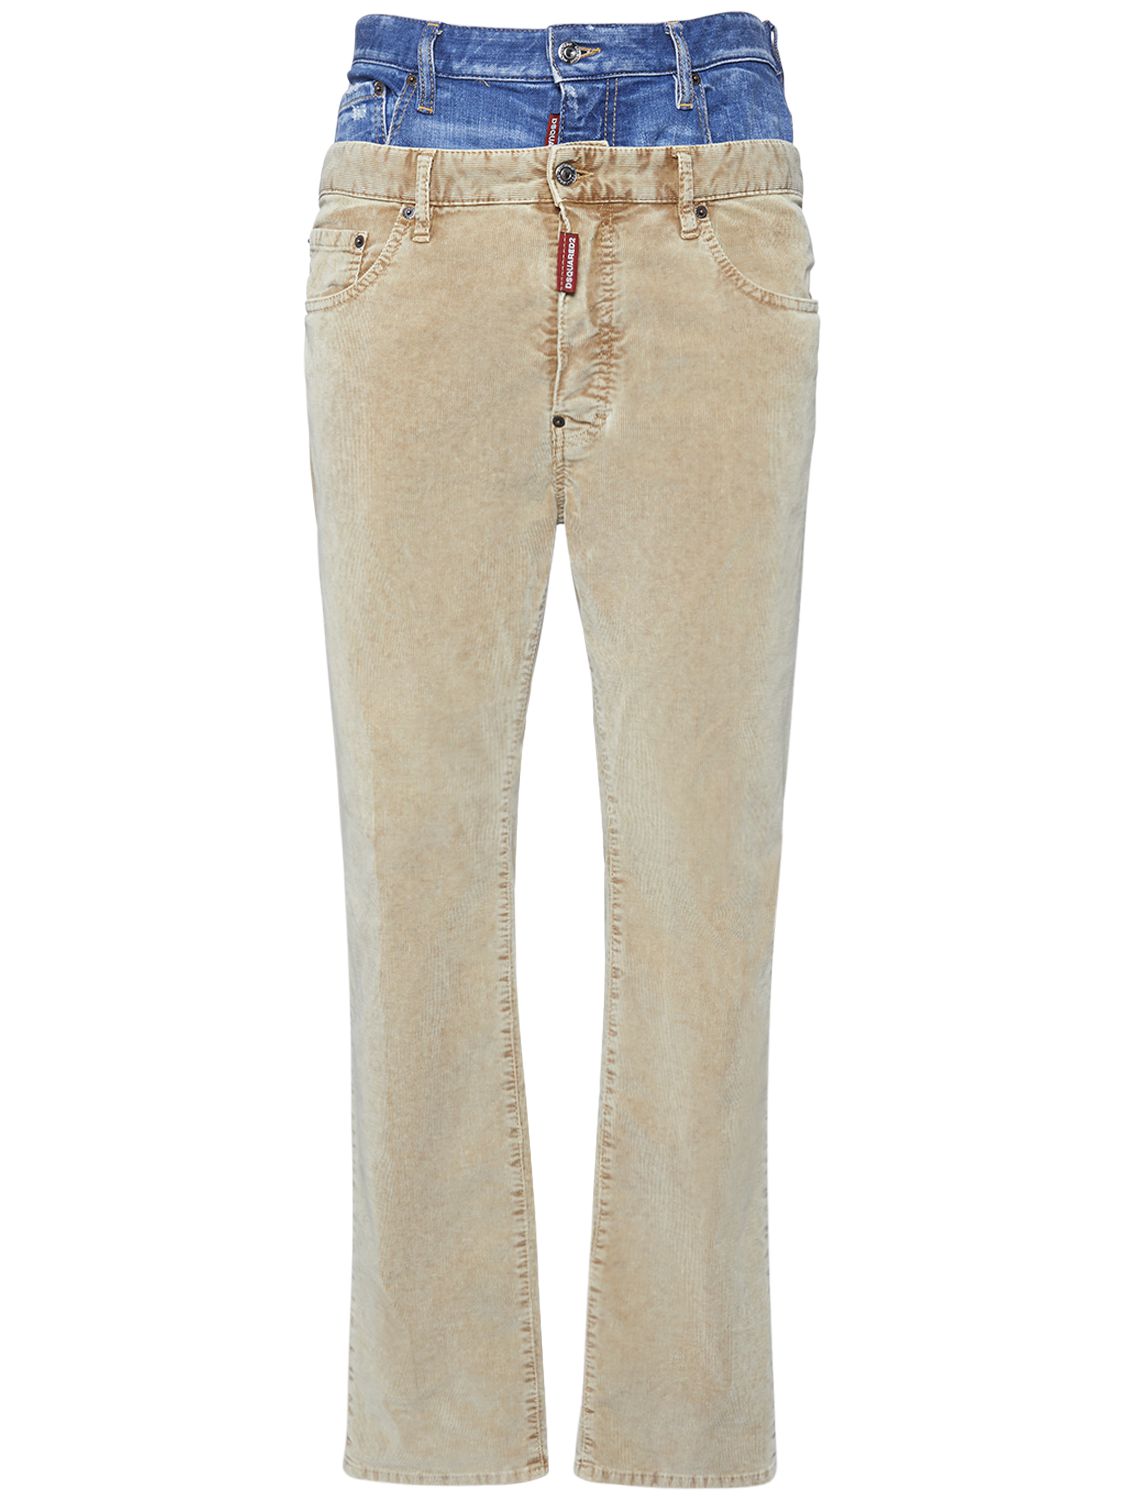 Twin Pack Layered Effect Jeans - DSQUARED2 - Modalova